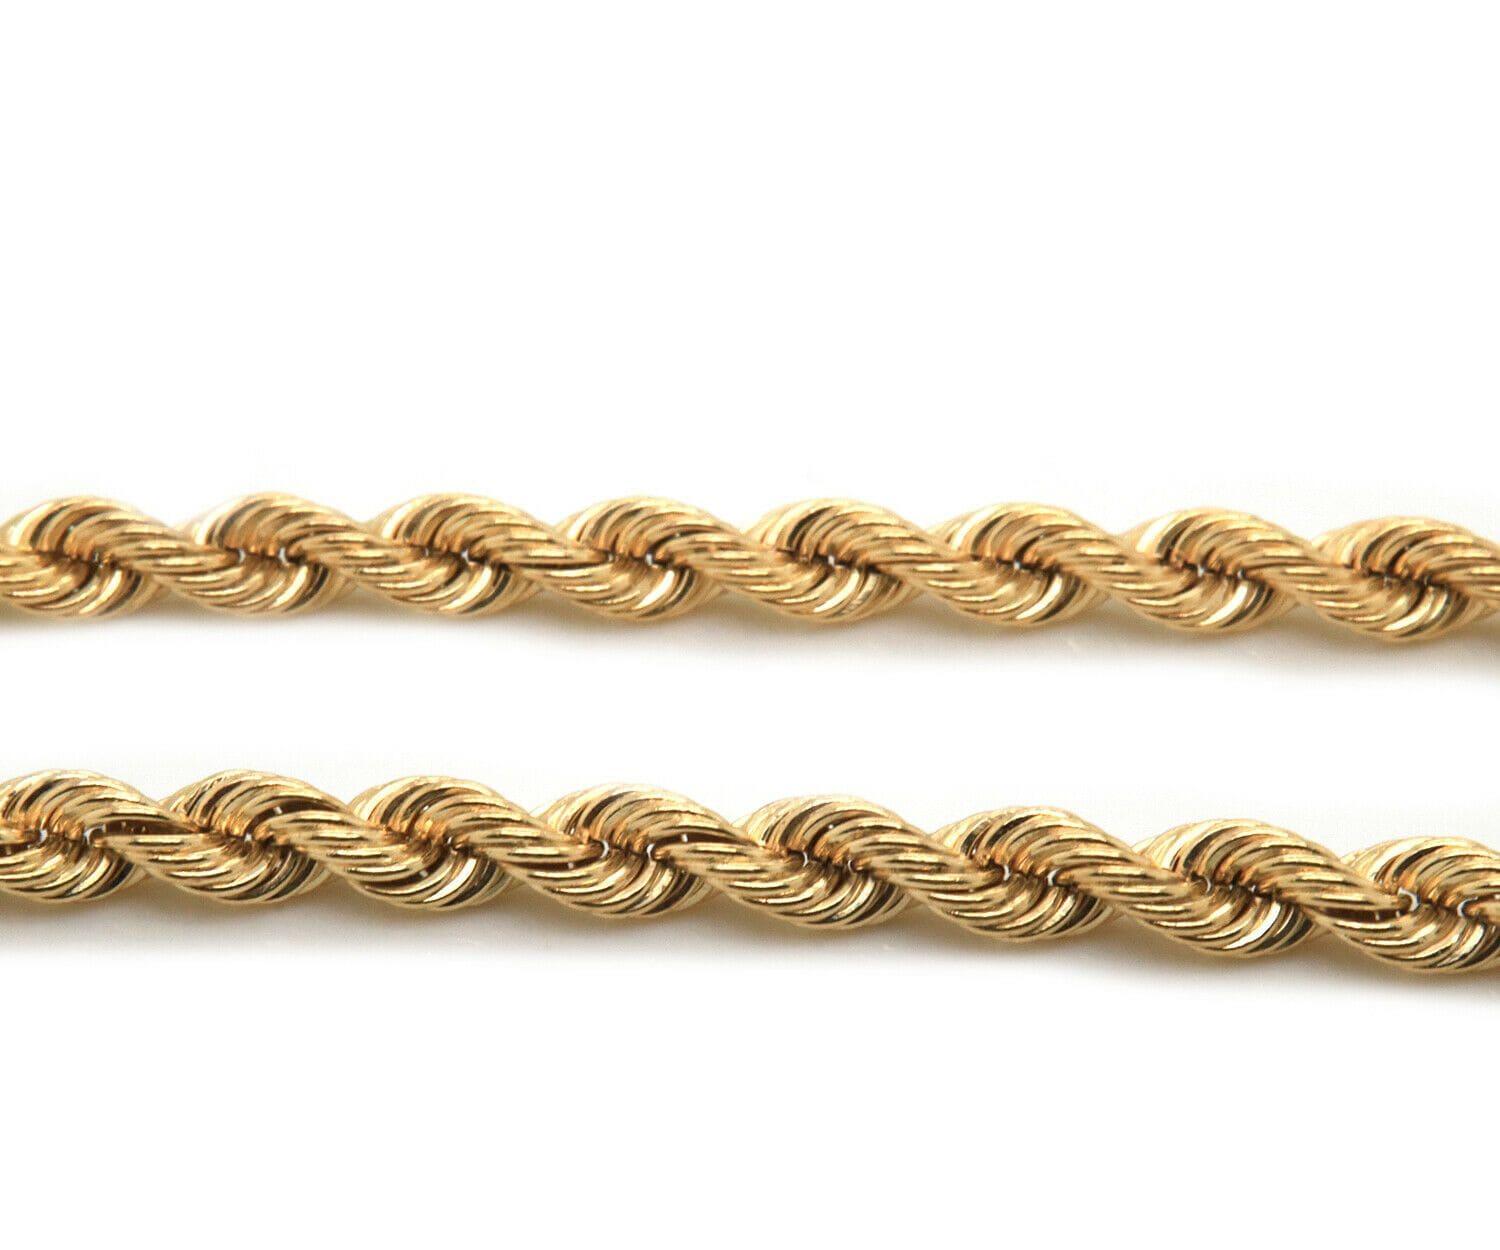 4.2 MM Rope Chain Necklace in 14K

Rope Chain Necklace
14K Yellow Gold
Necklace Width: Approx. 4.2 MM
Necklace Length: Approx. 18.0 Inches
Weight: Approx. 24.10 Grams
Stamped: 14K

Condition:
Offered for your consideration is a previously owned rope